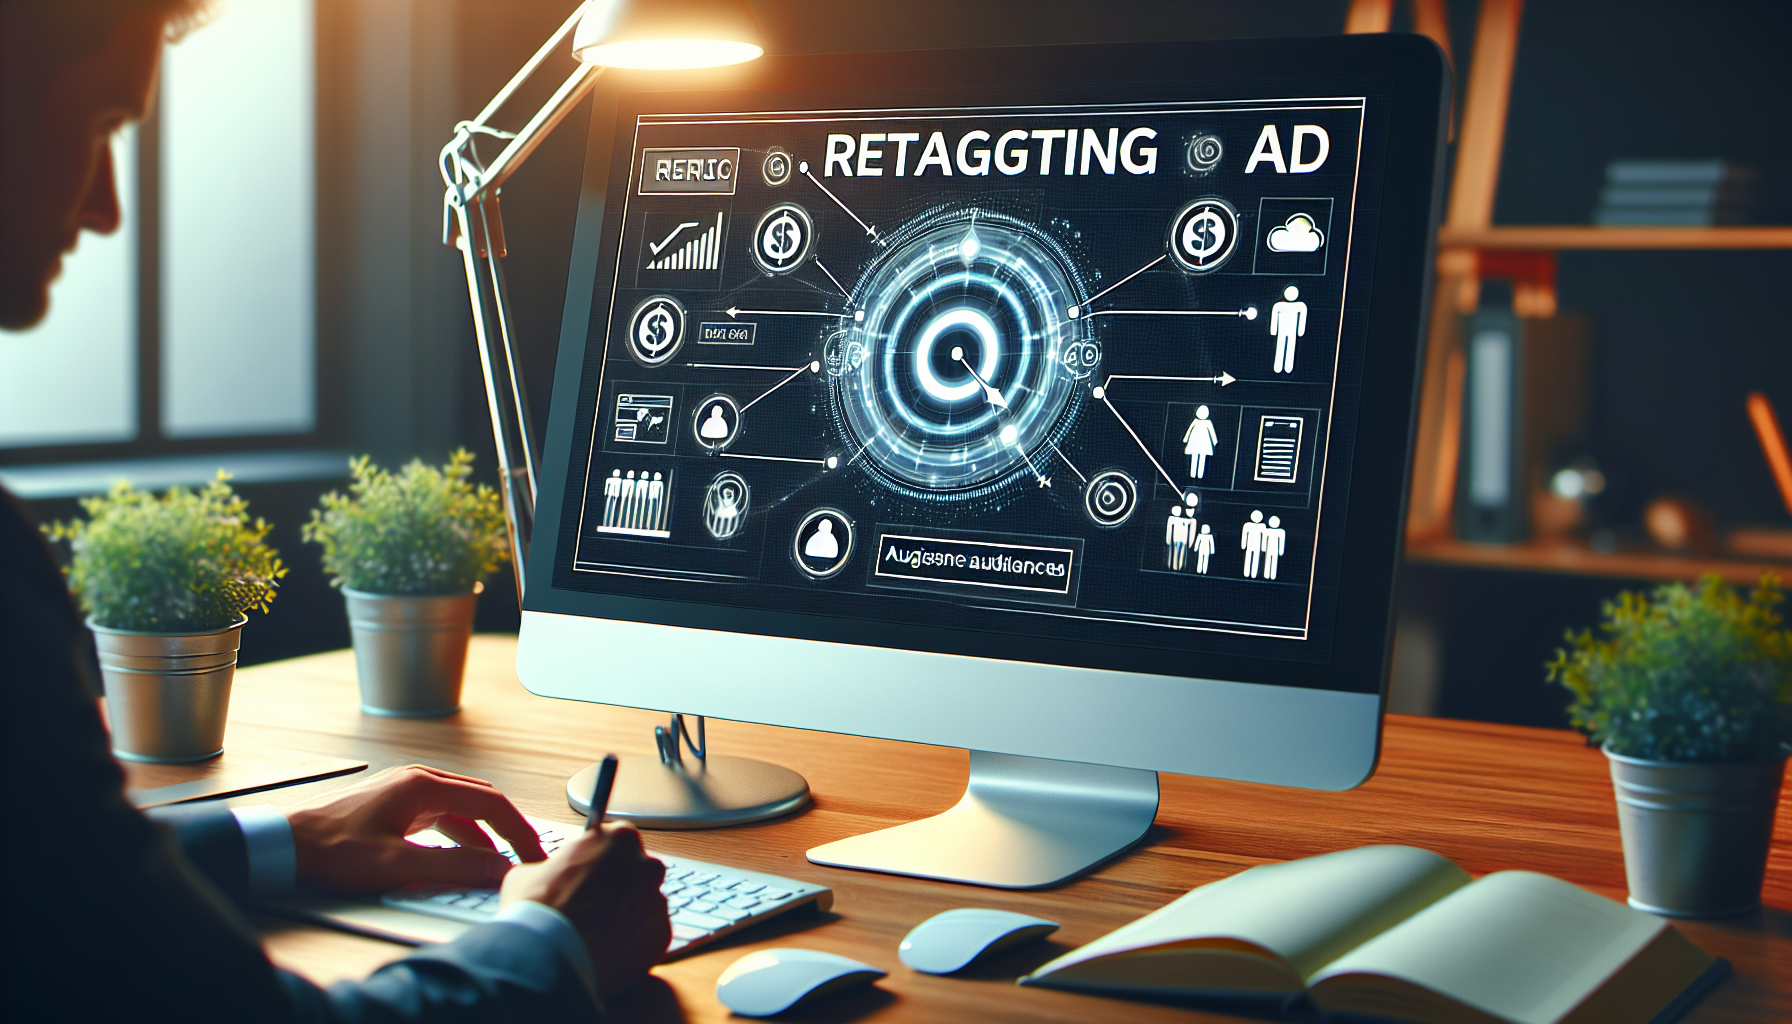 Setting Up Different Audiences for Facebook Retargeting Ads